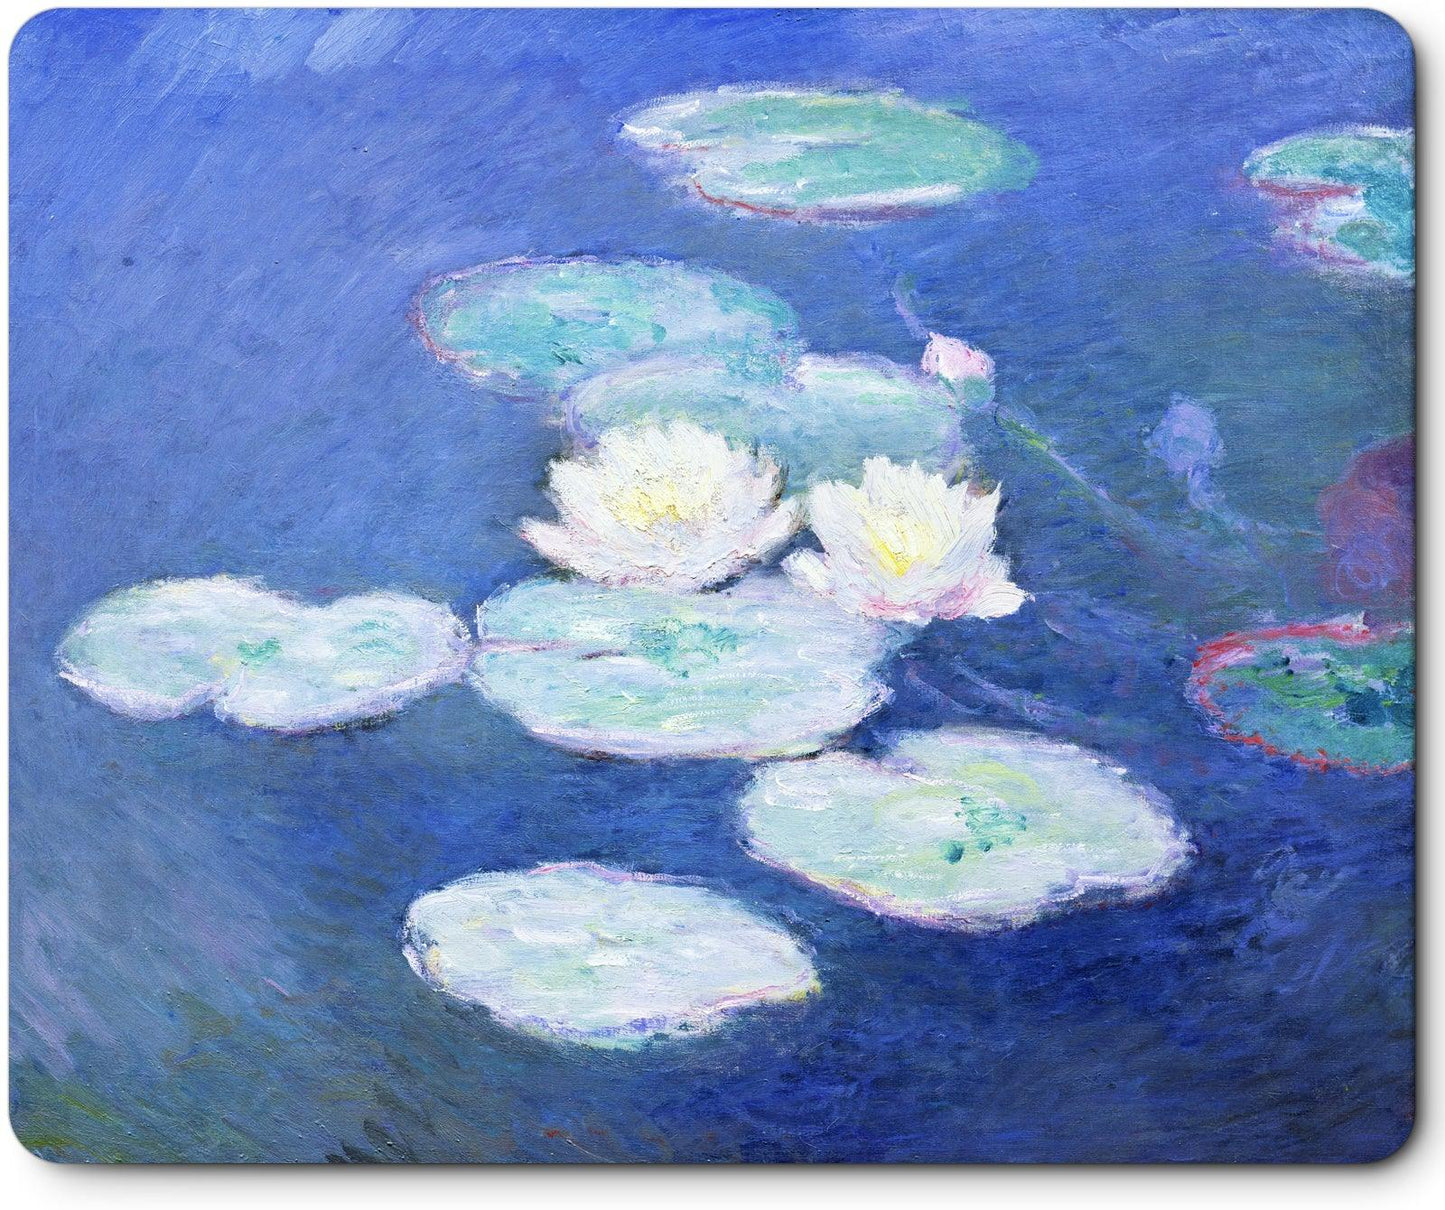 Art Square Mouse Pad 9.5 x 7.9 Inches (Water Lilies by Claude Monet) - Berkin Arts